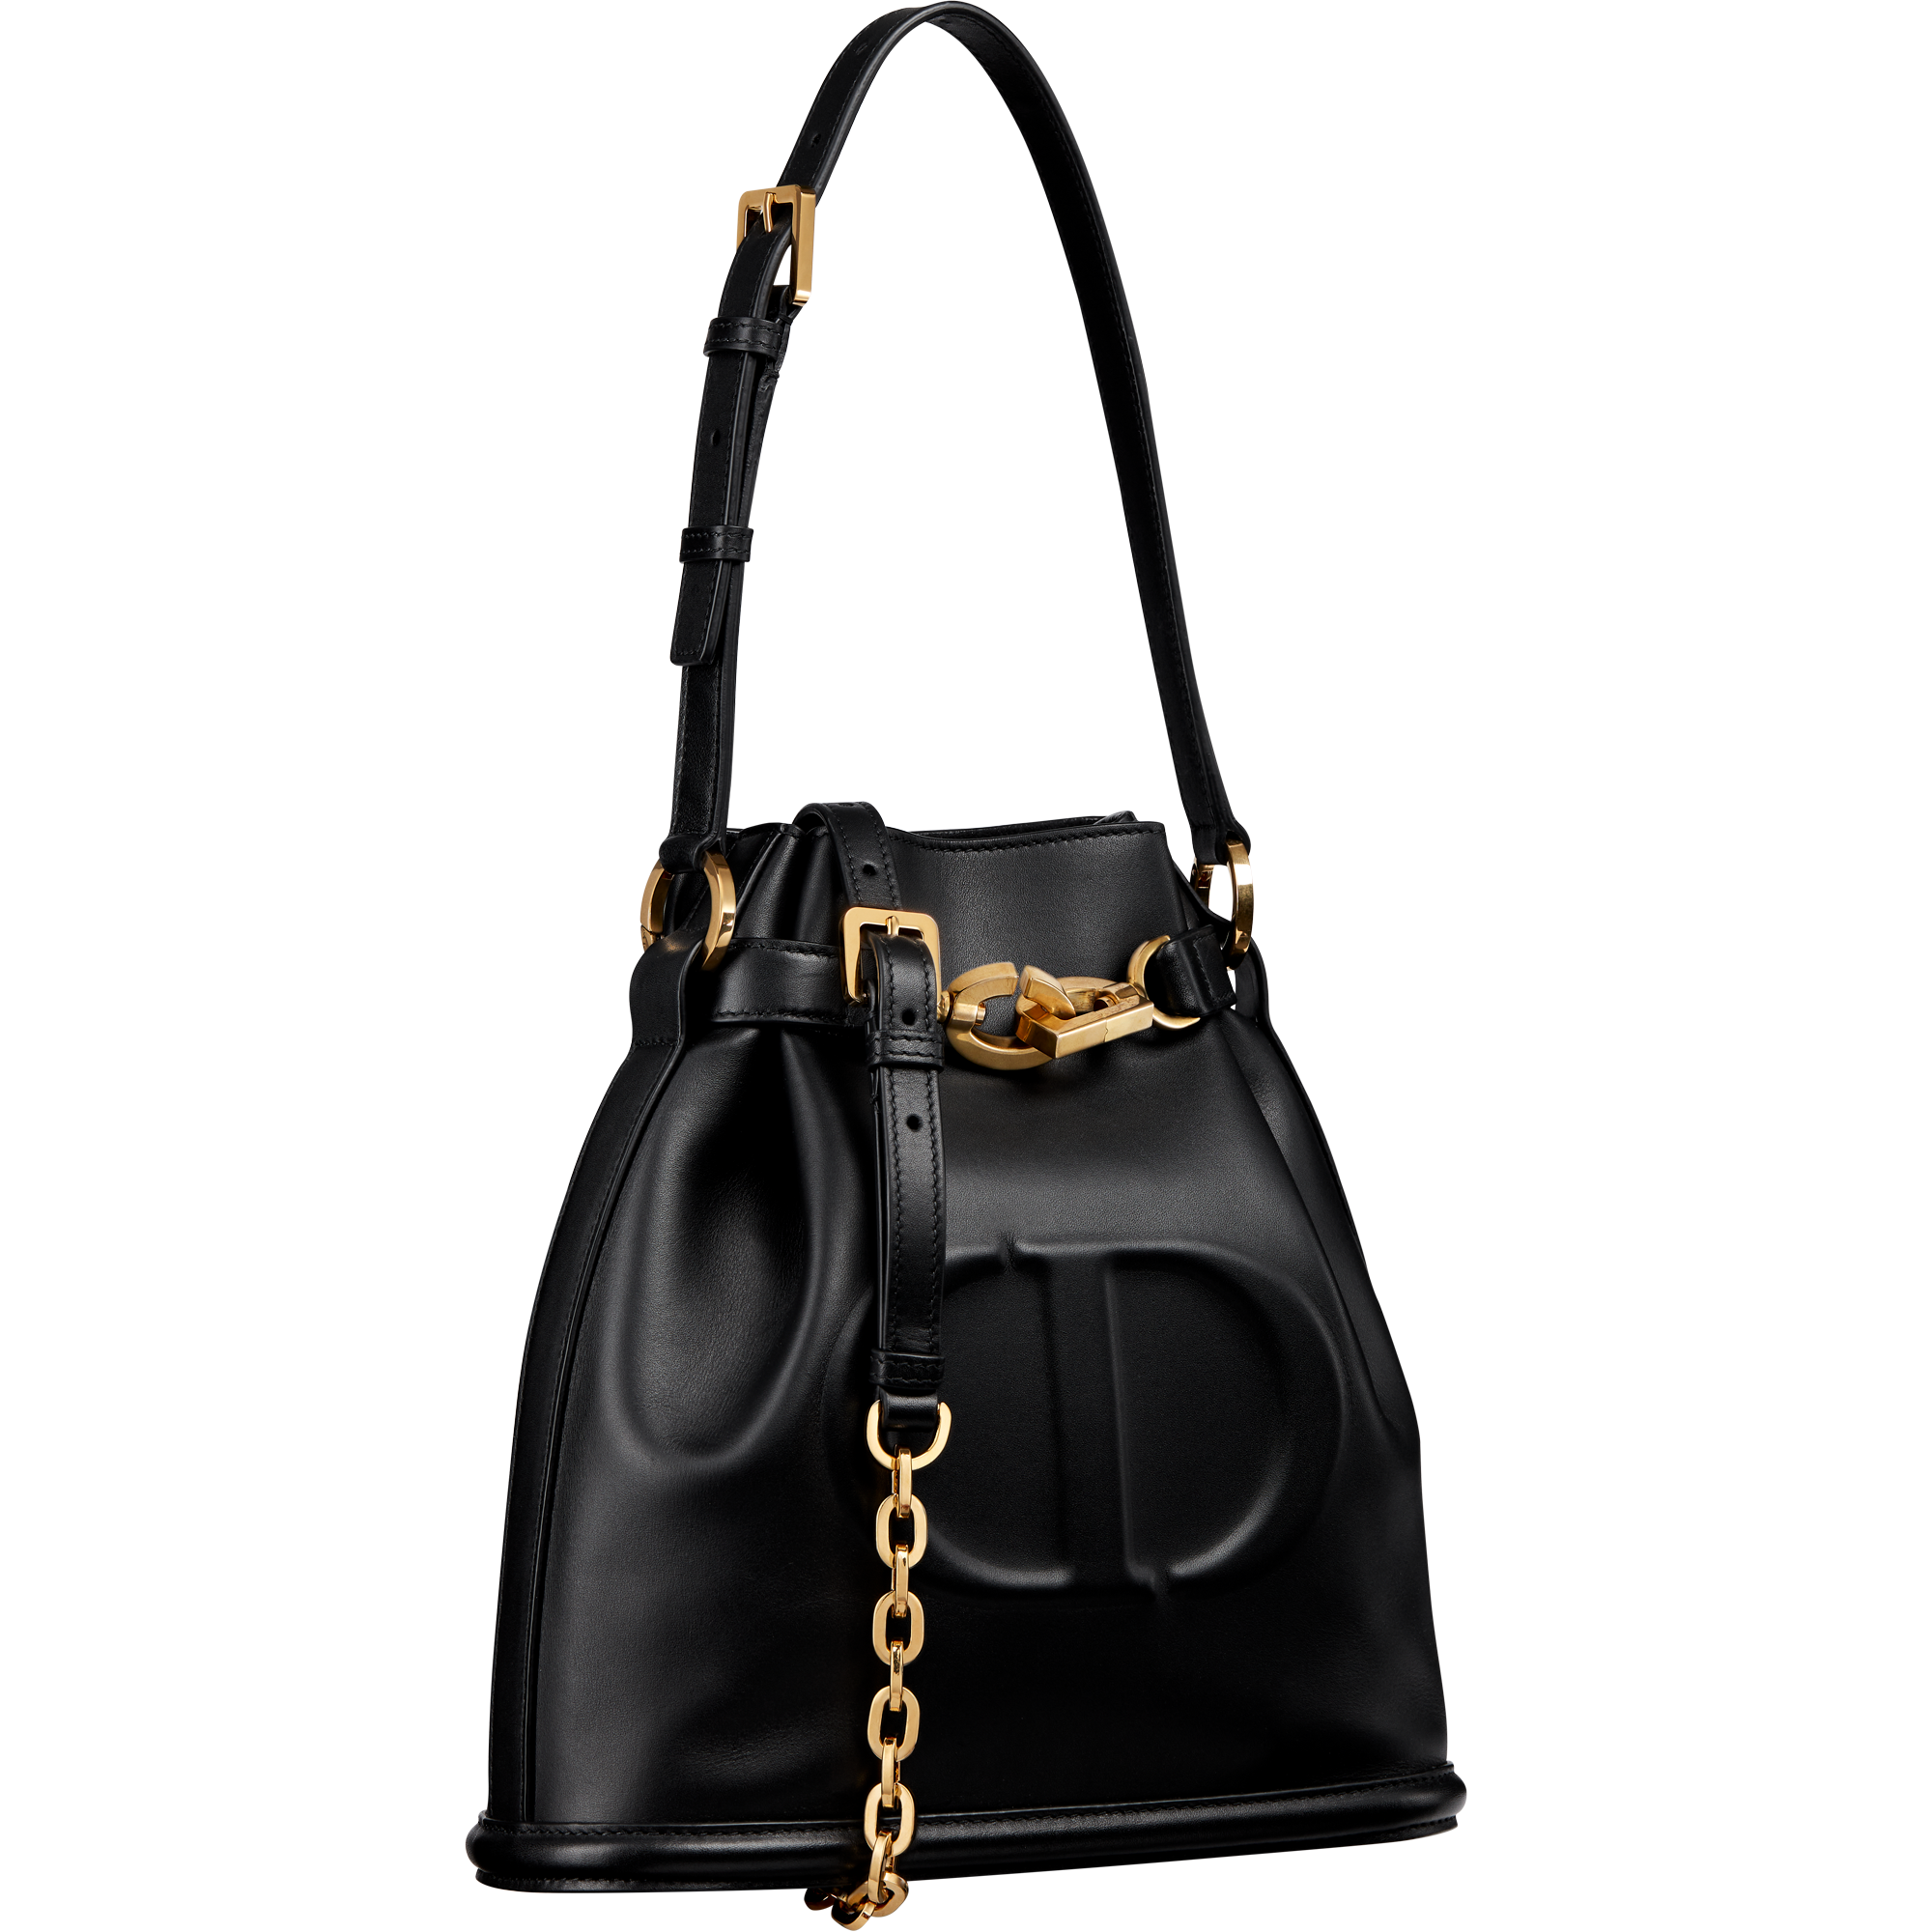 The C'est Dior Bag is Our Newest Obsession